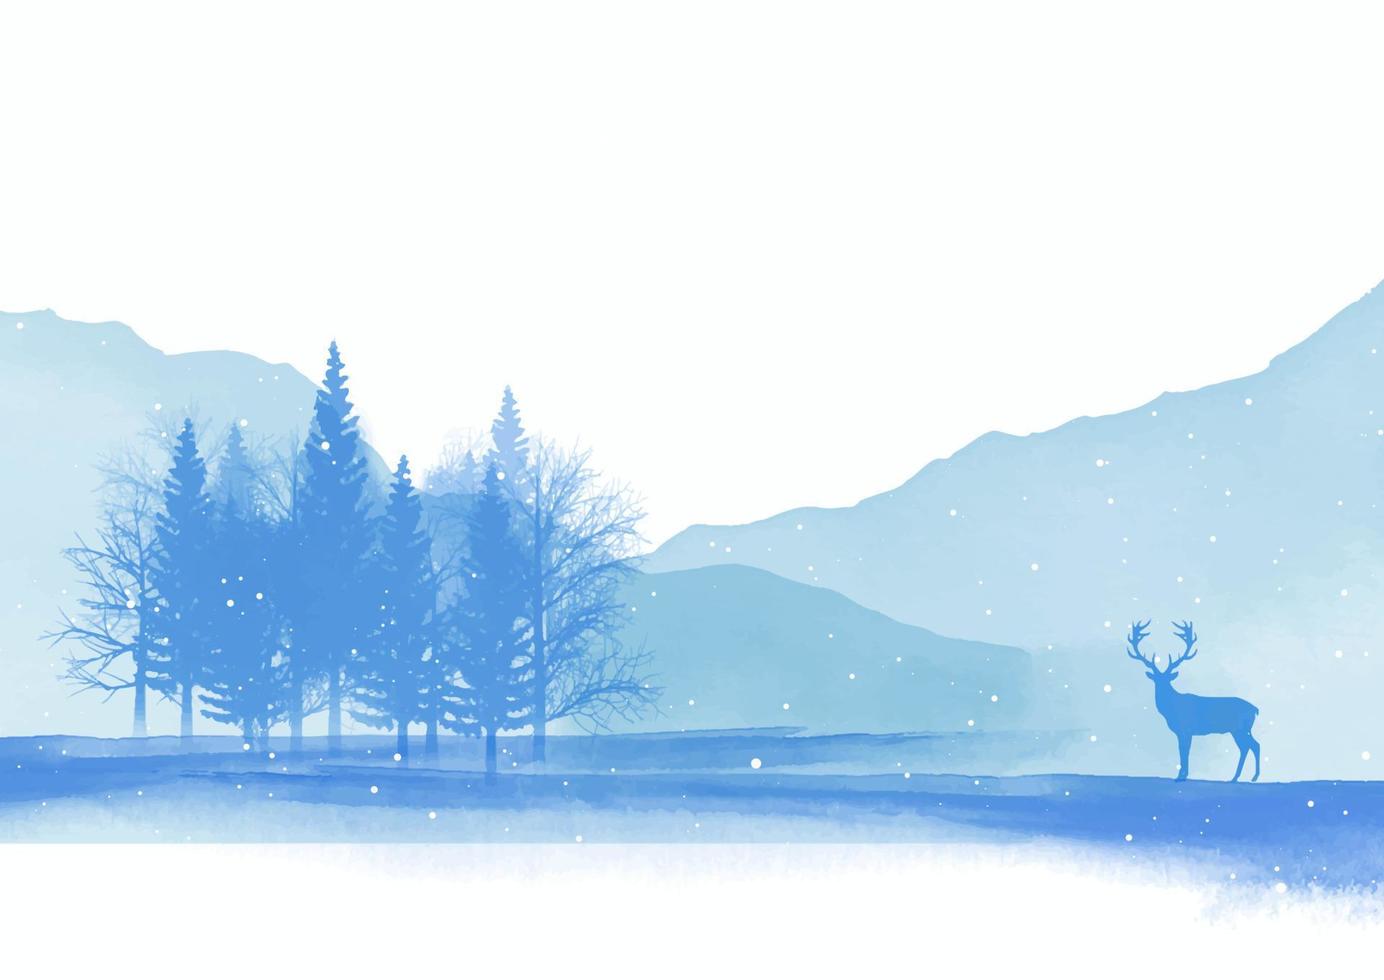 Watercolour hand painted winter landscape with trees and deer vector